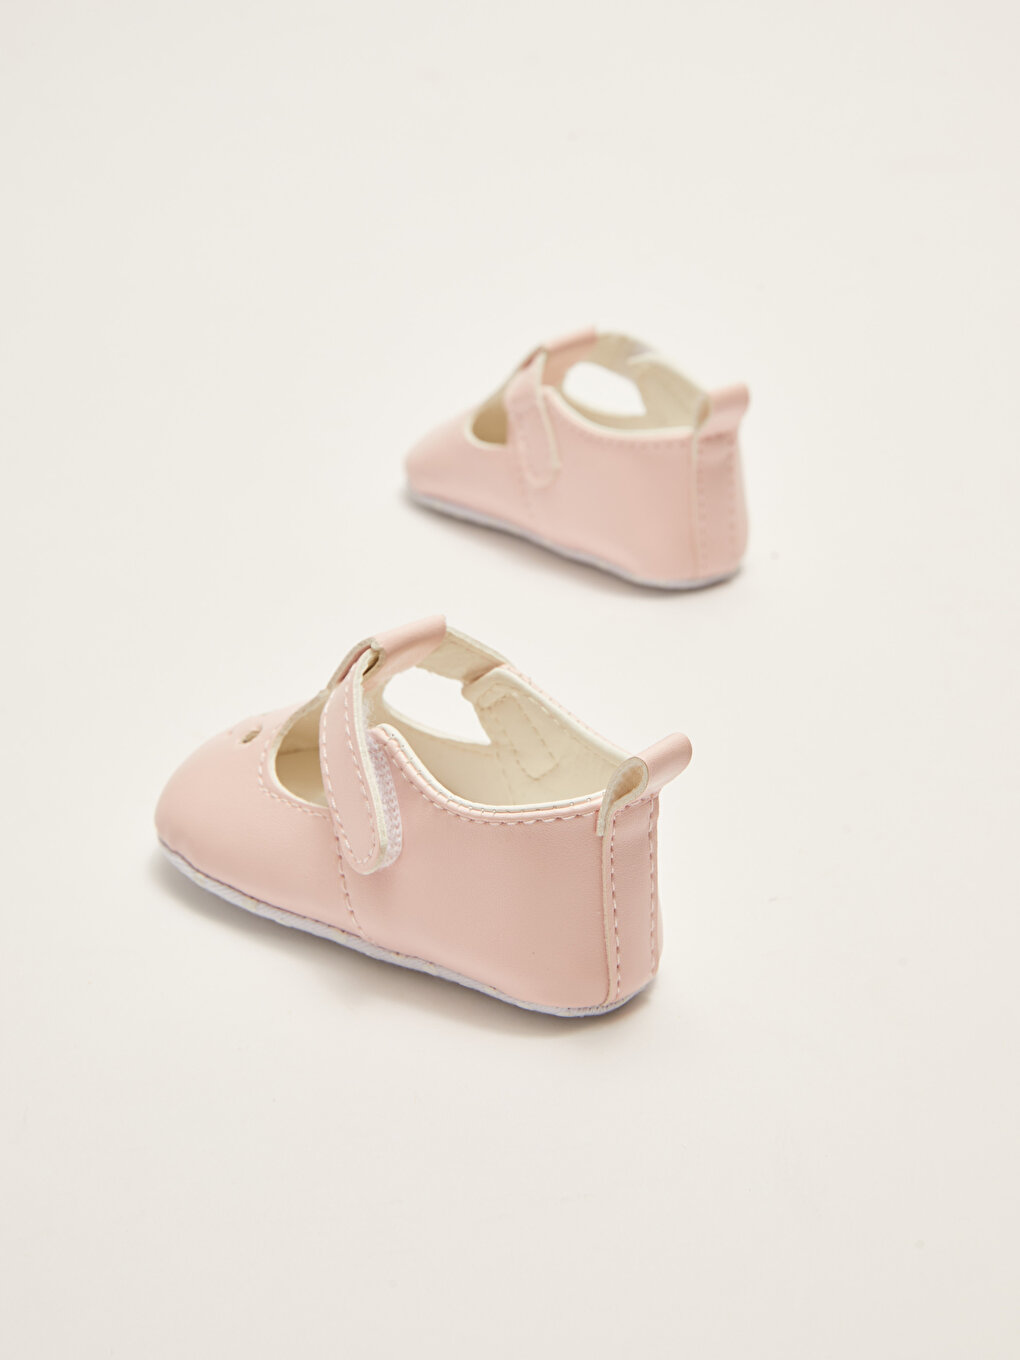 Velcro Closure Baby Girl Pre-Toddler Shoes -S28820Z1-CRC - S28820Z1-CRC ...